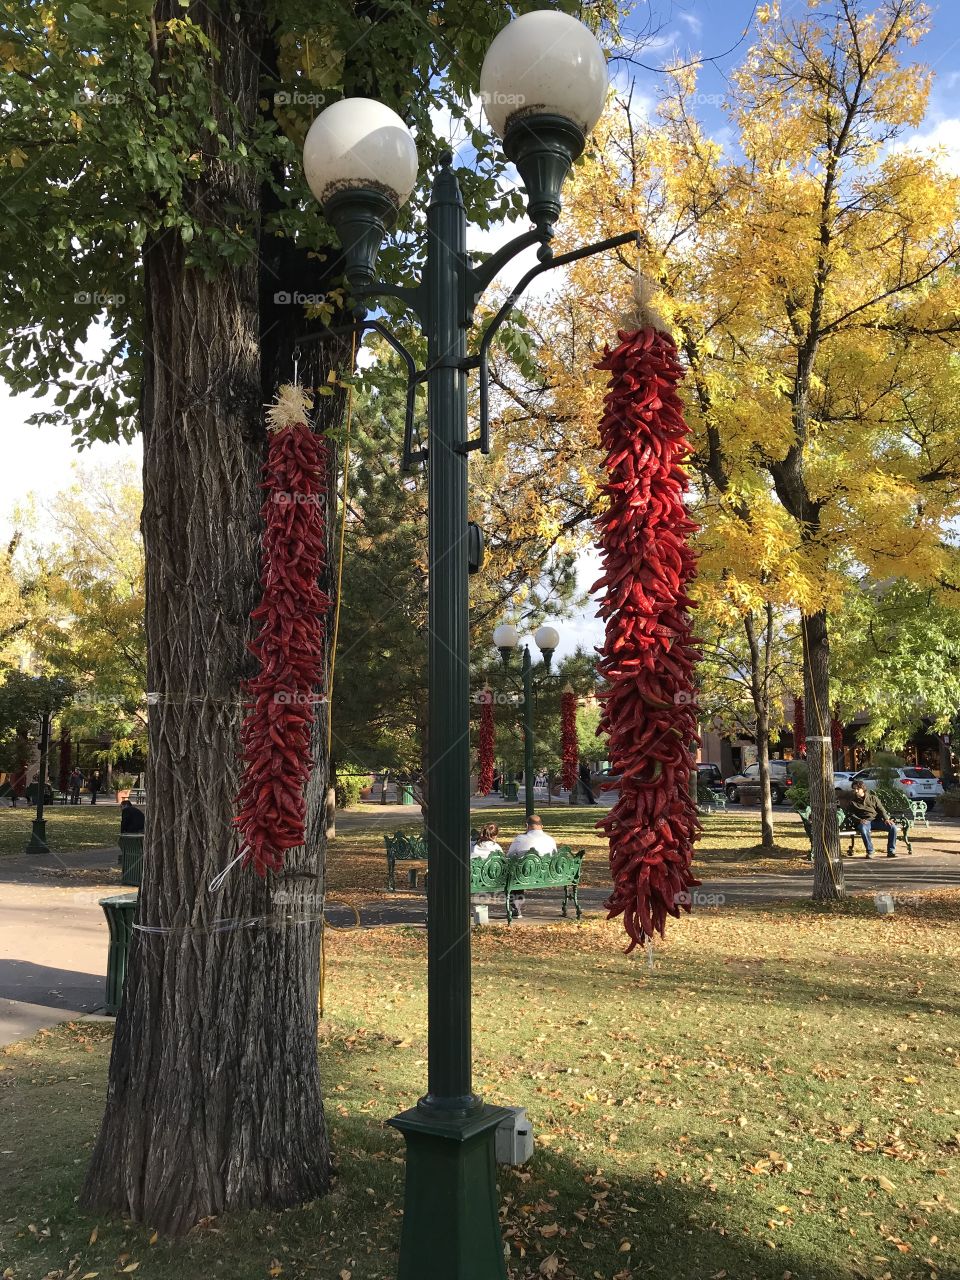 A beautiful Fall evening on the Plaza in Santa Fe, New Mexico, with hanging chilis